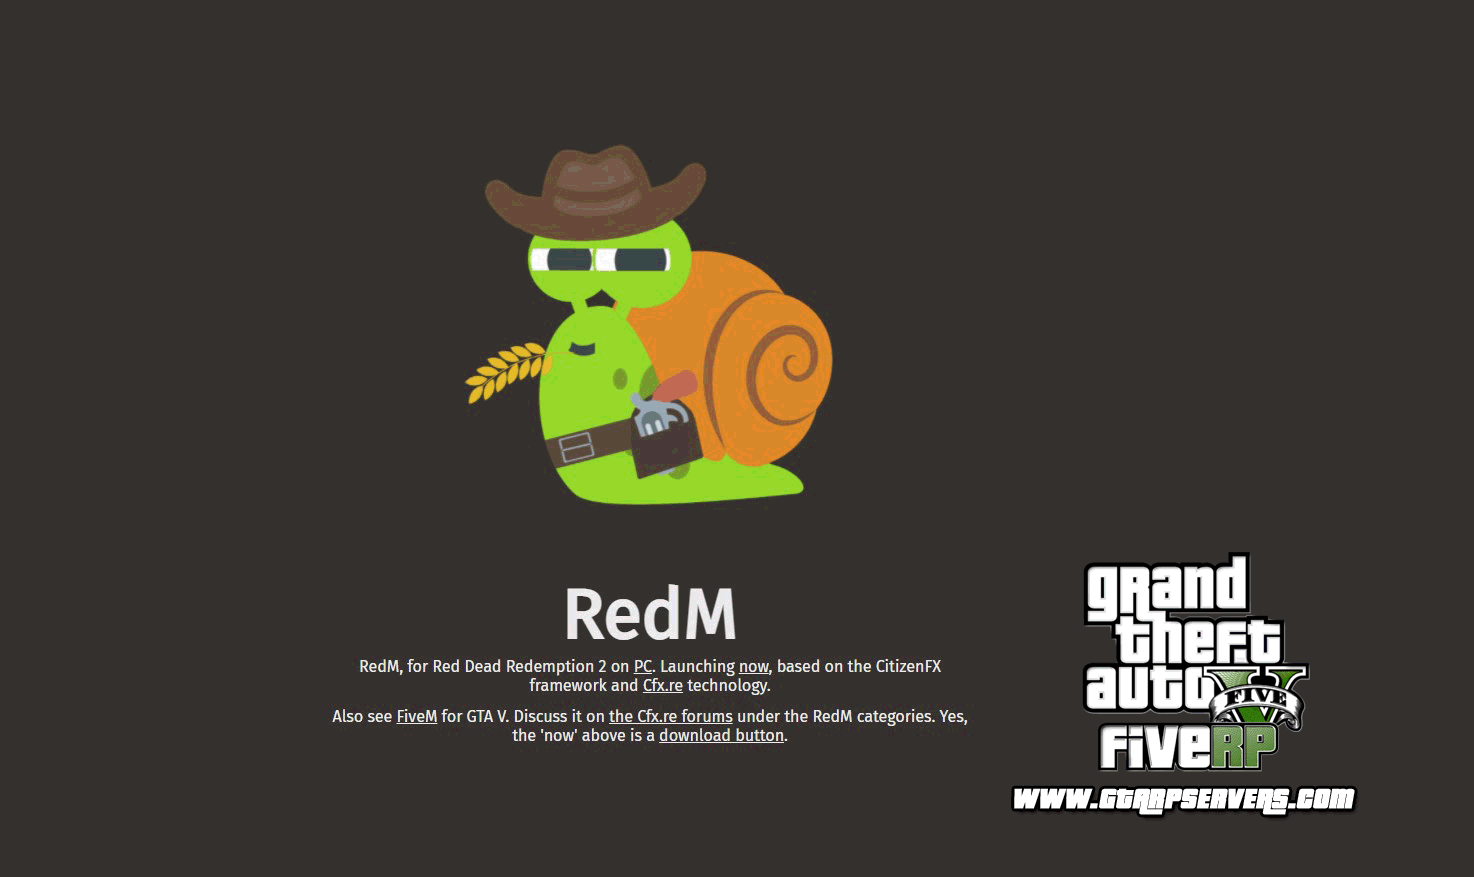 How to download and Install Redm?